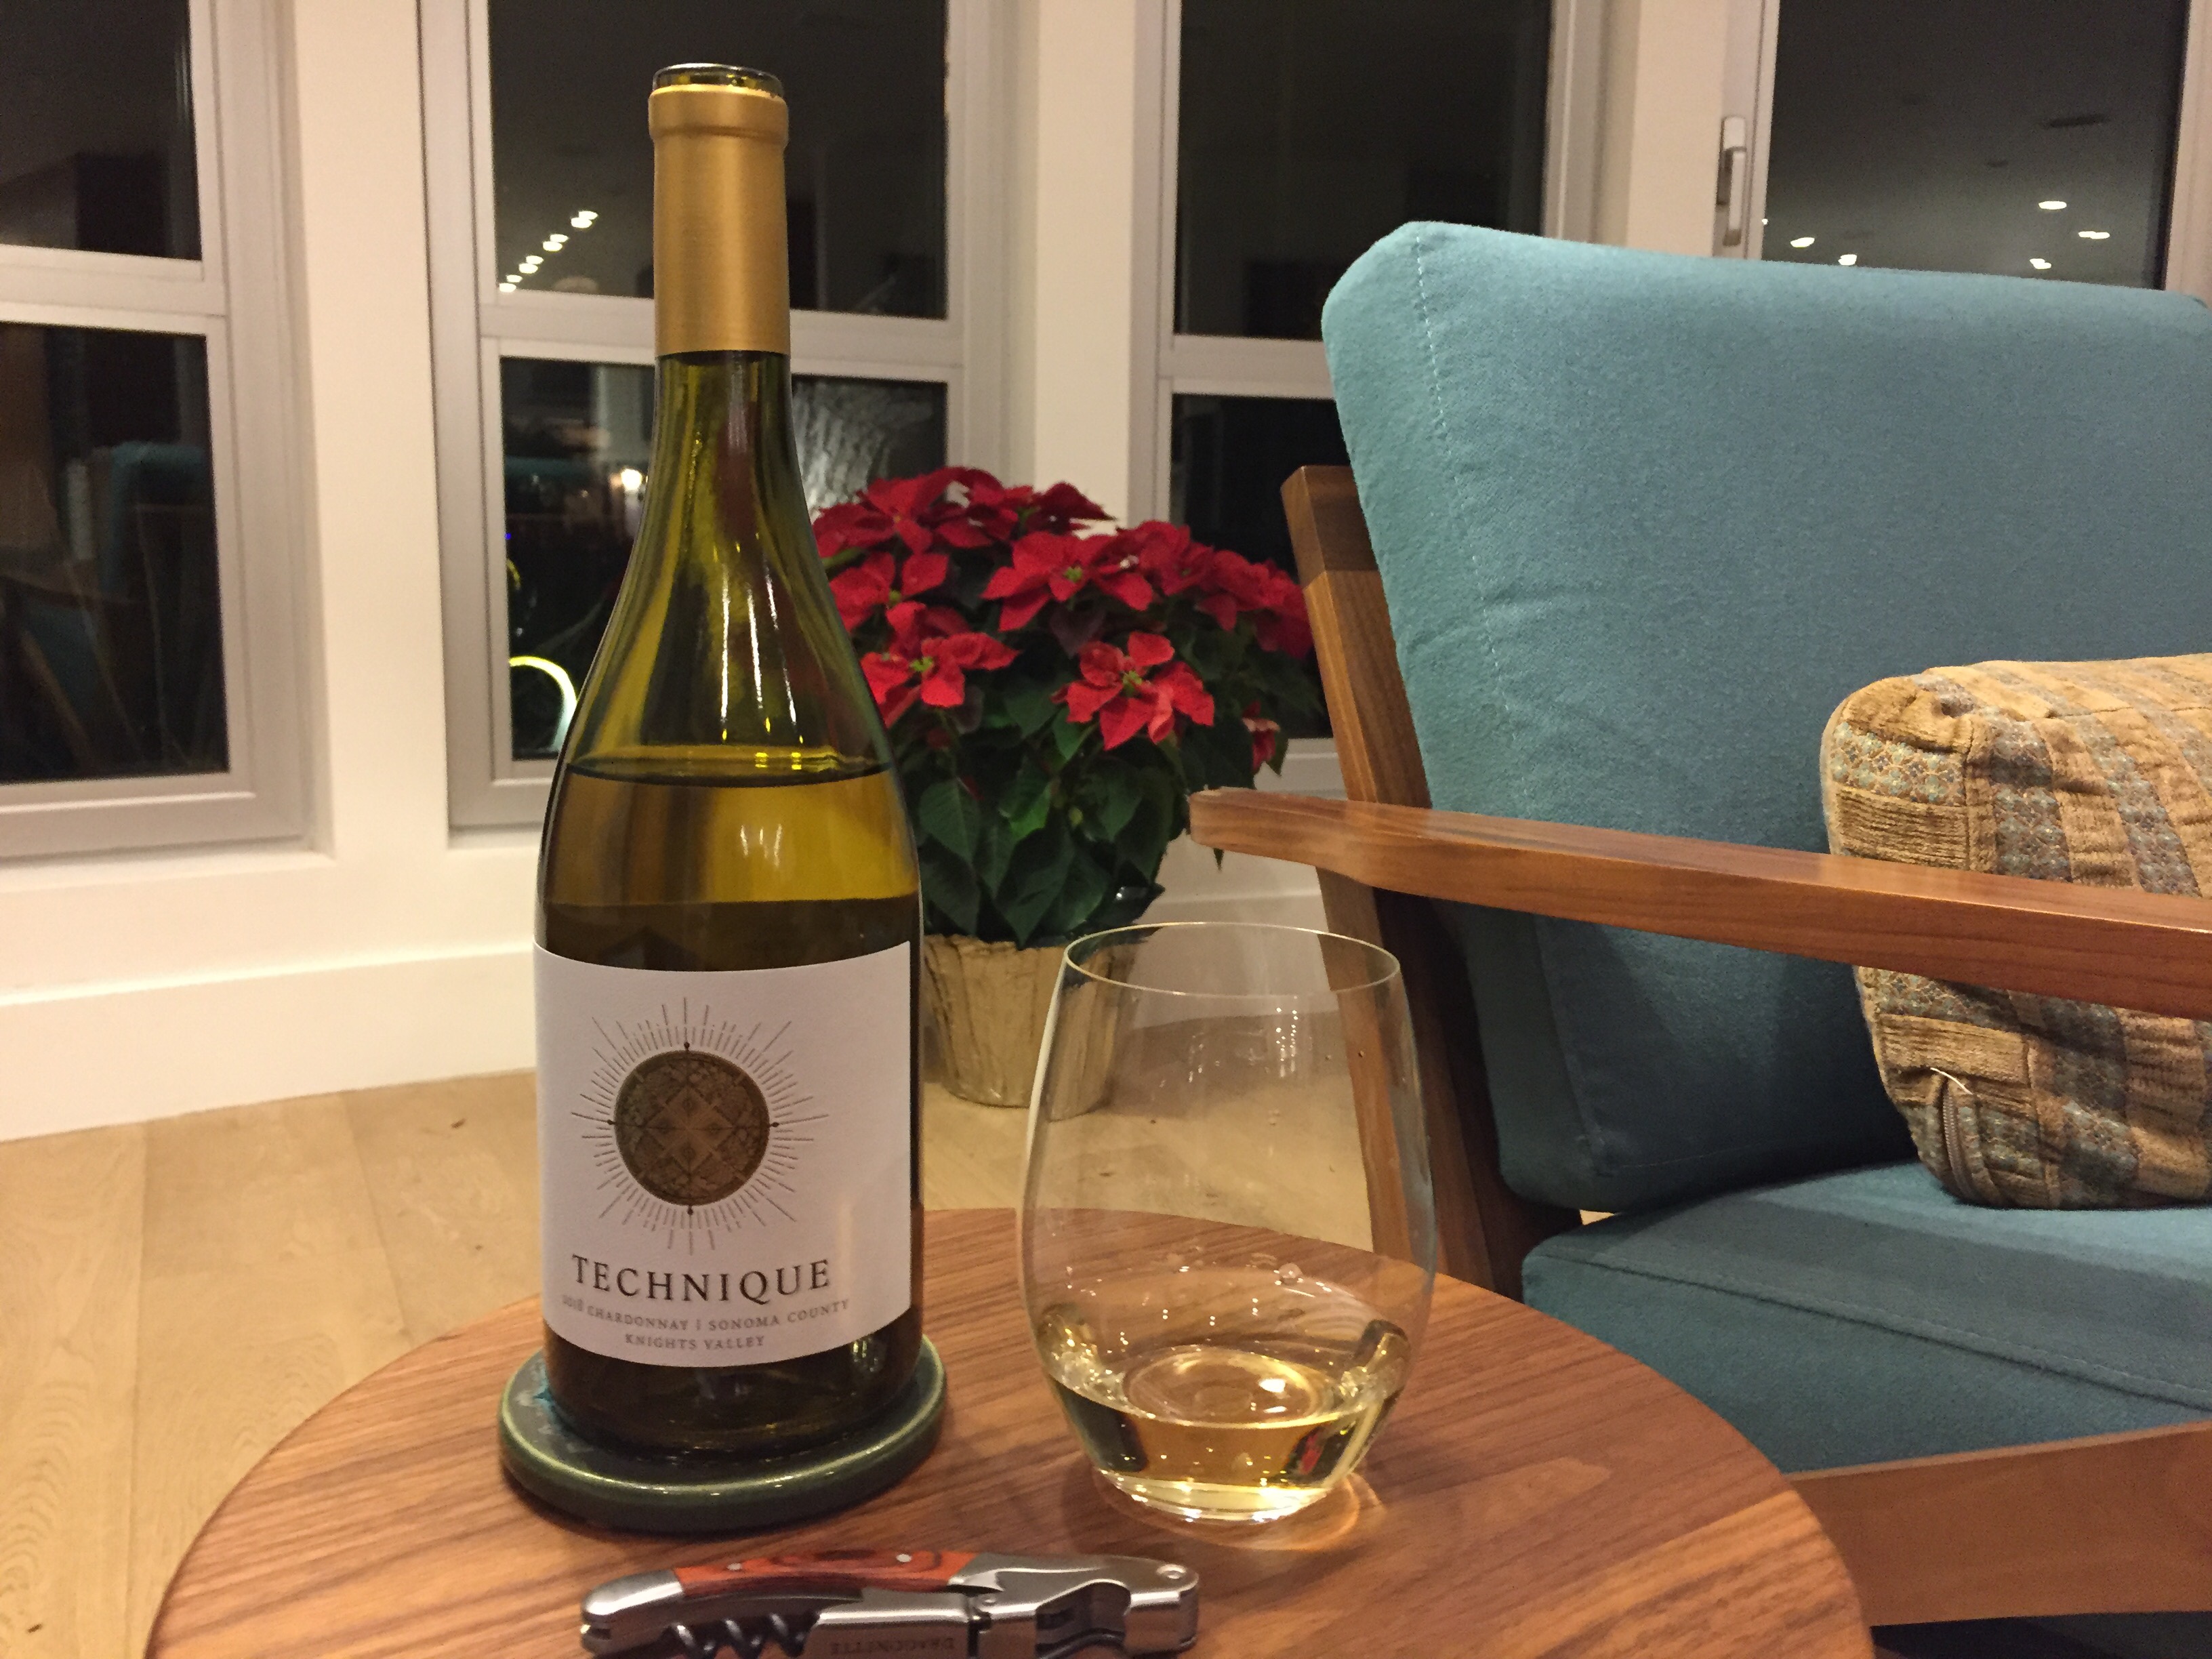 Bottle and glass of Technique Chardonnay from Costco.